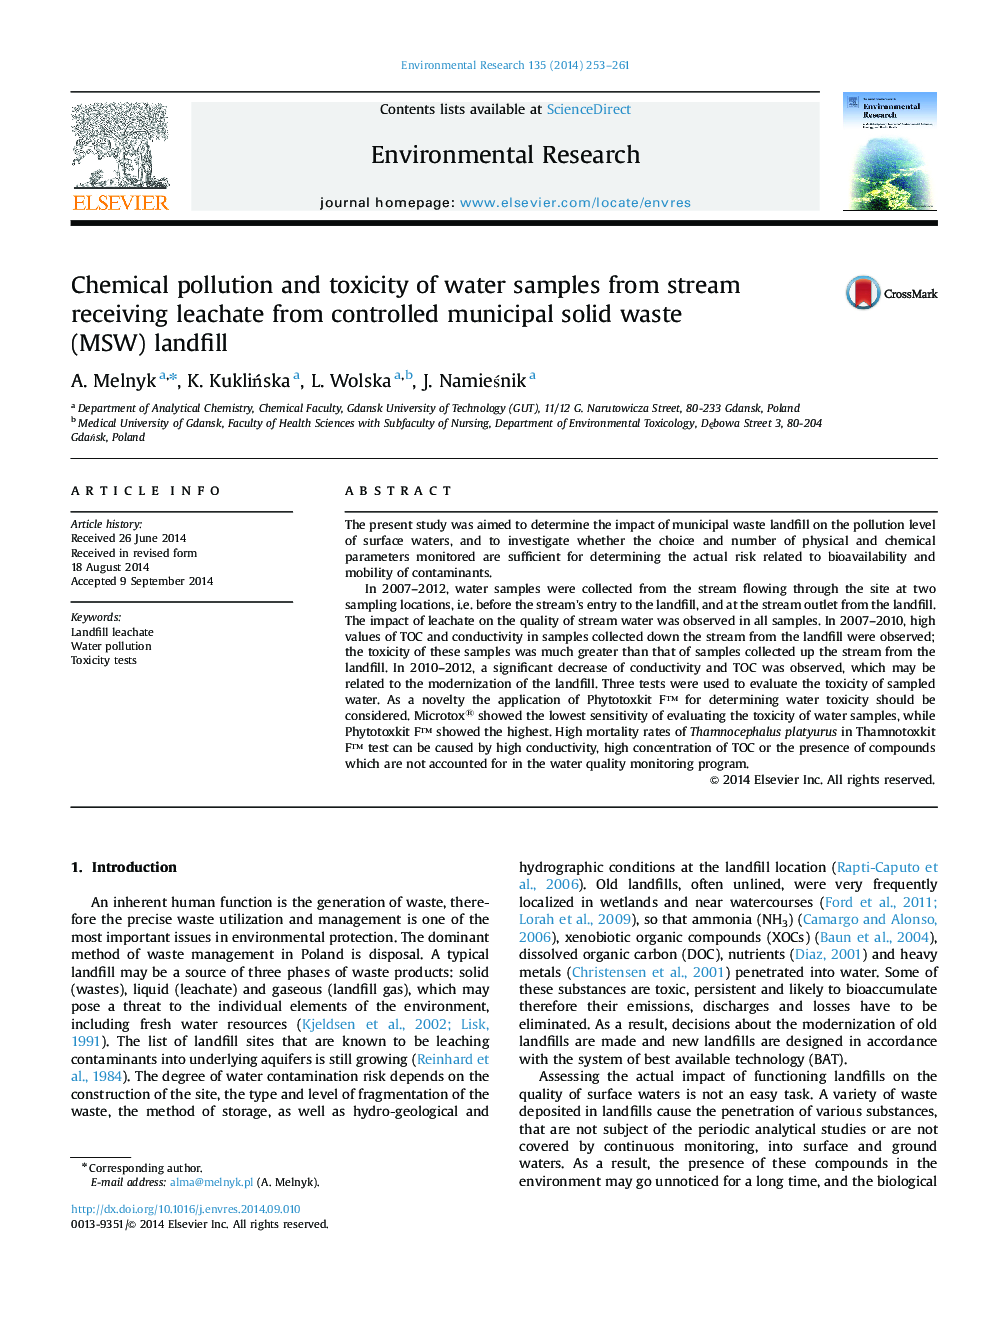 Chemical pollution and toxicity of water samples from stream receiving leachate from controlled municipal solid waste (MSW) landfill